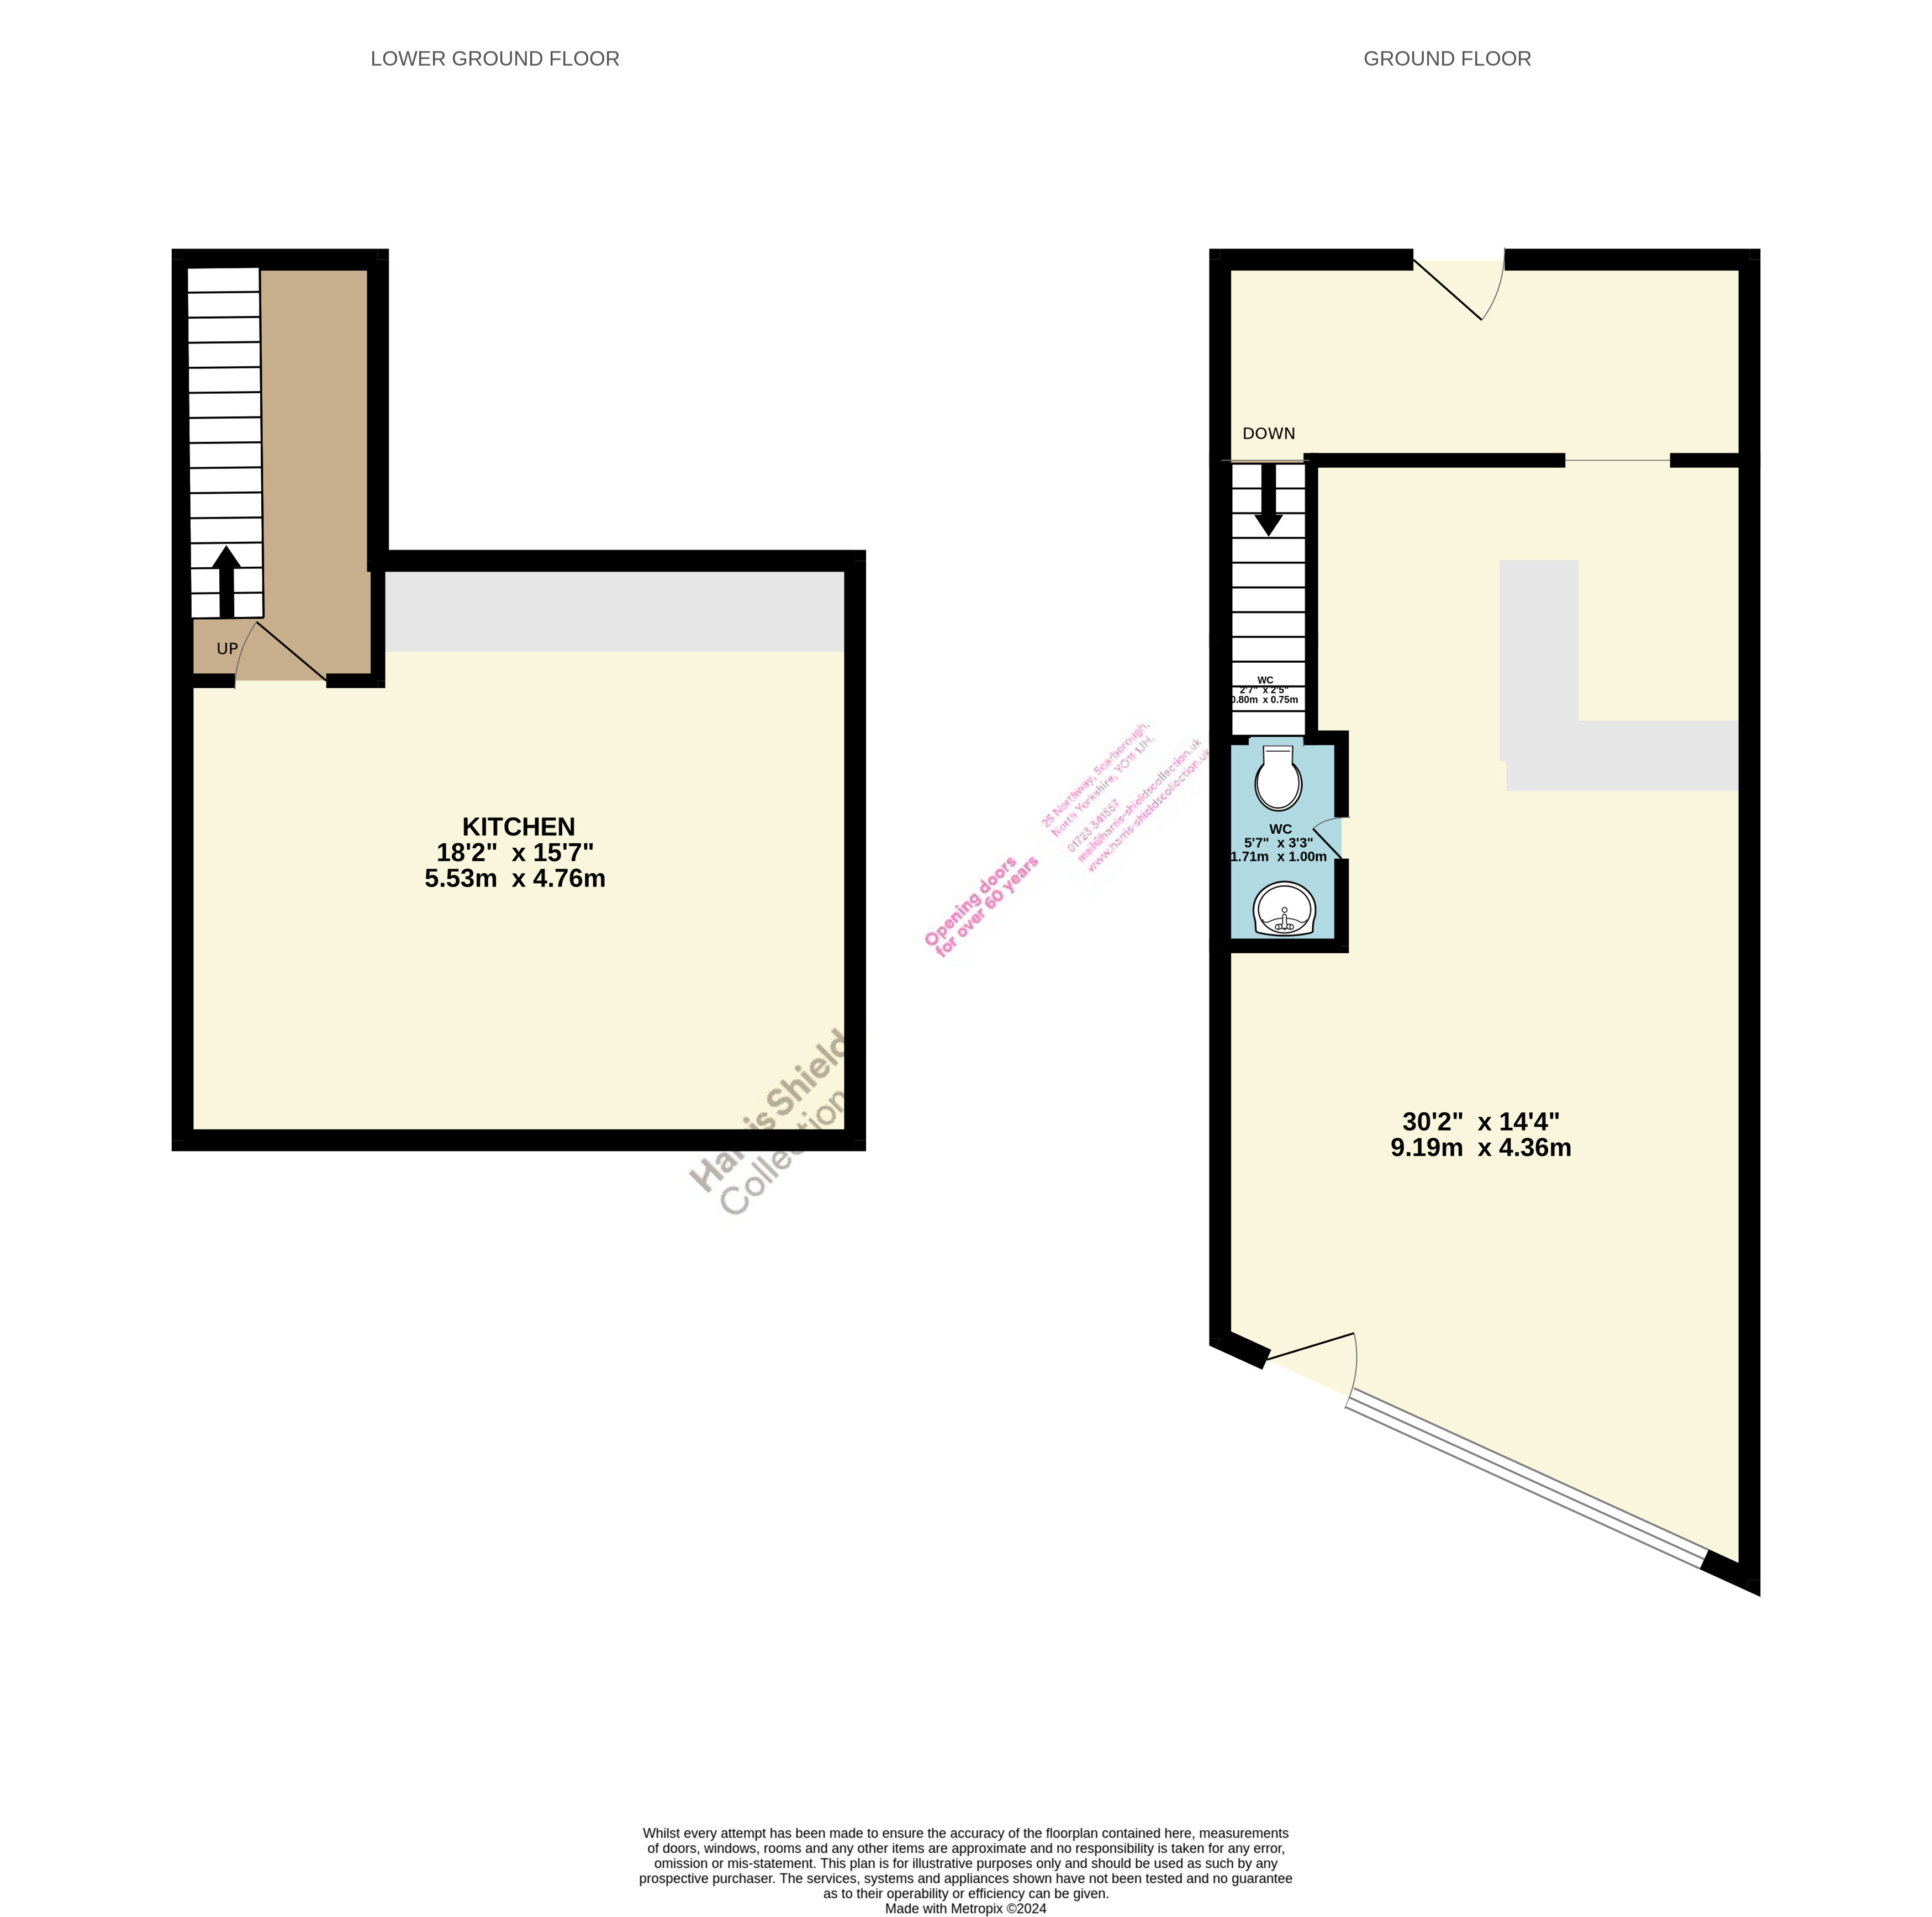  for sale in Eastborough, Scarborough - Property floorplan